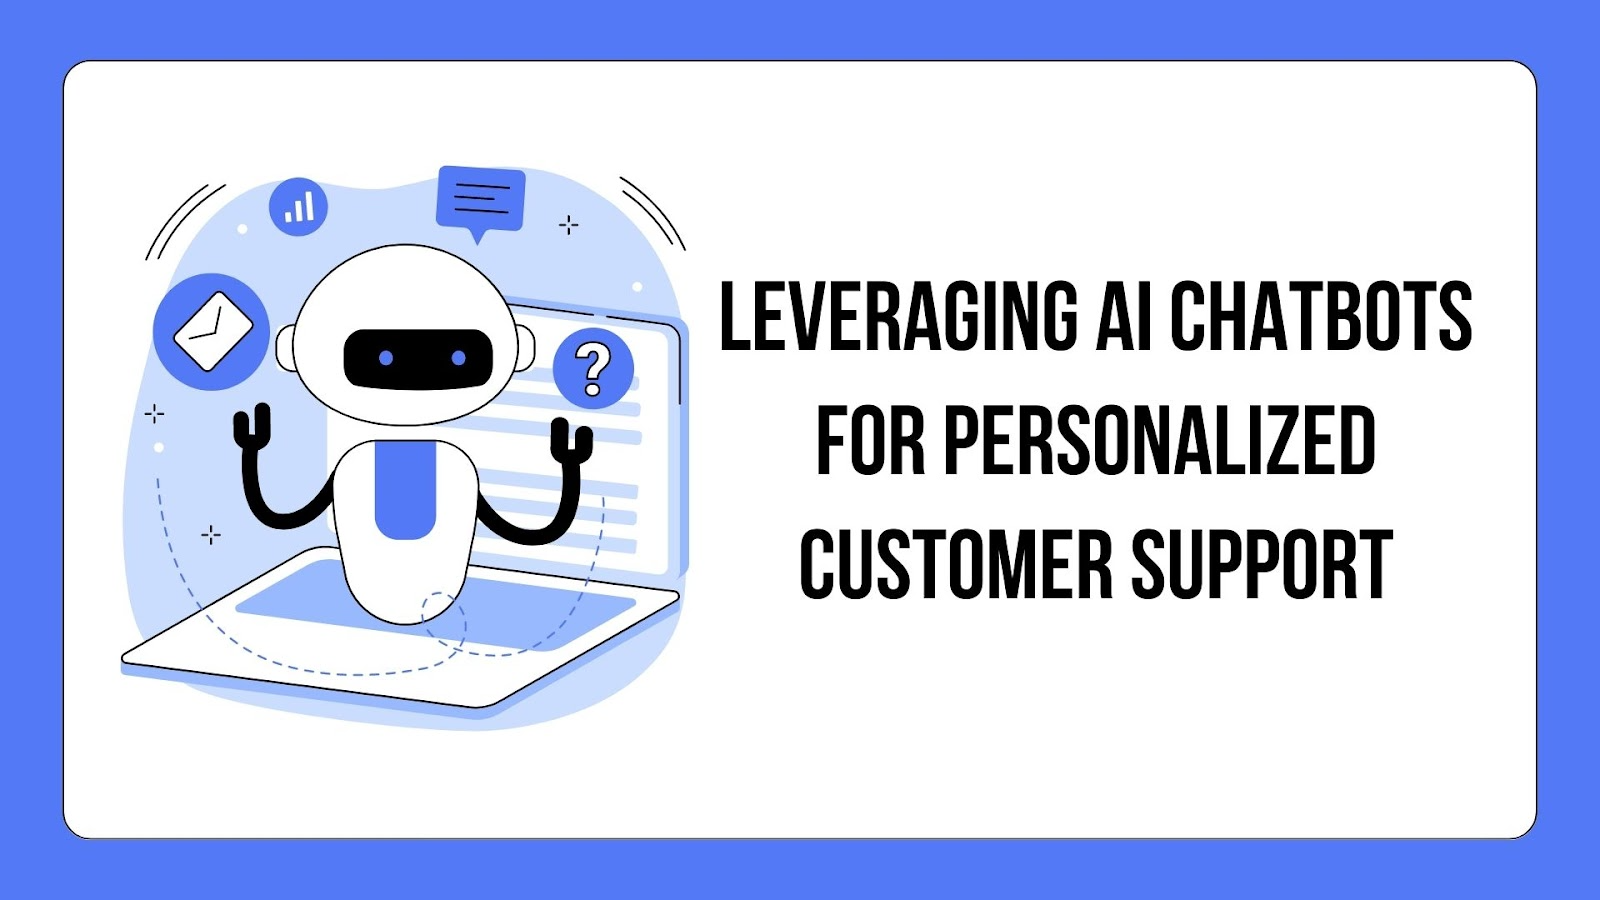 Leveraging AI Chatbots for Personalized Customer Support